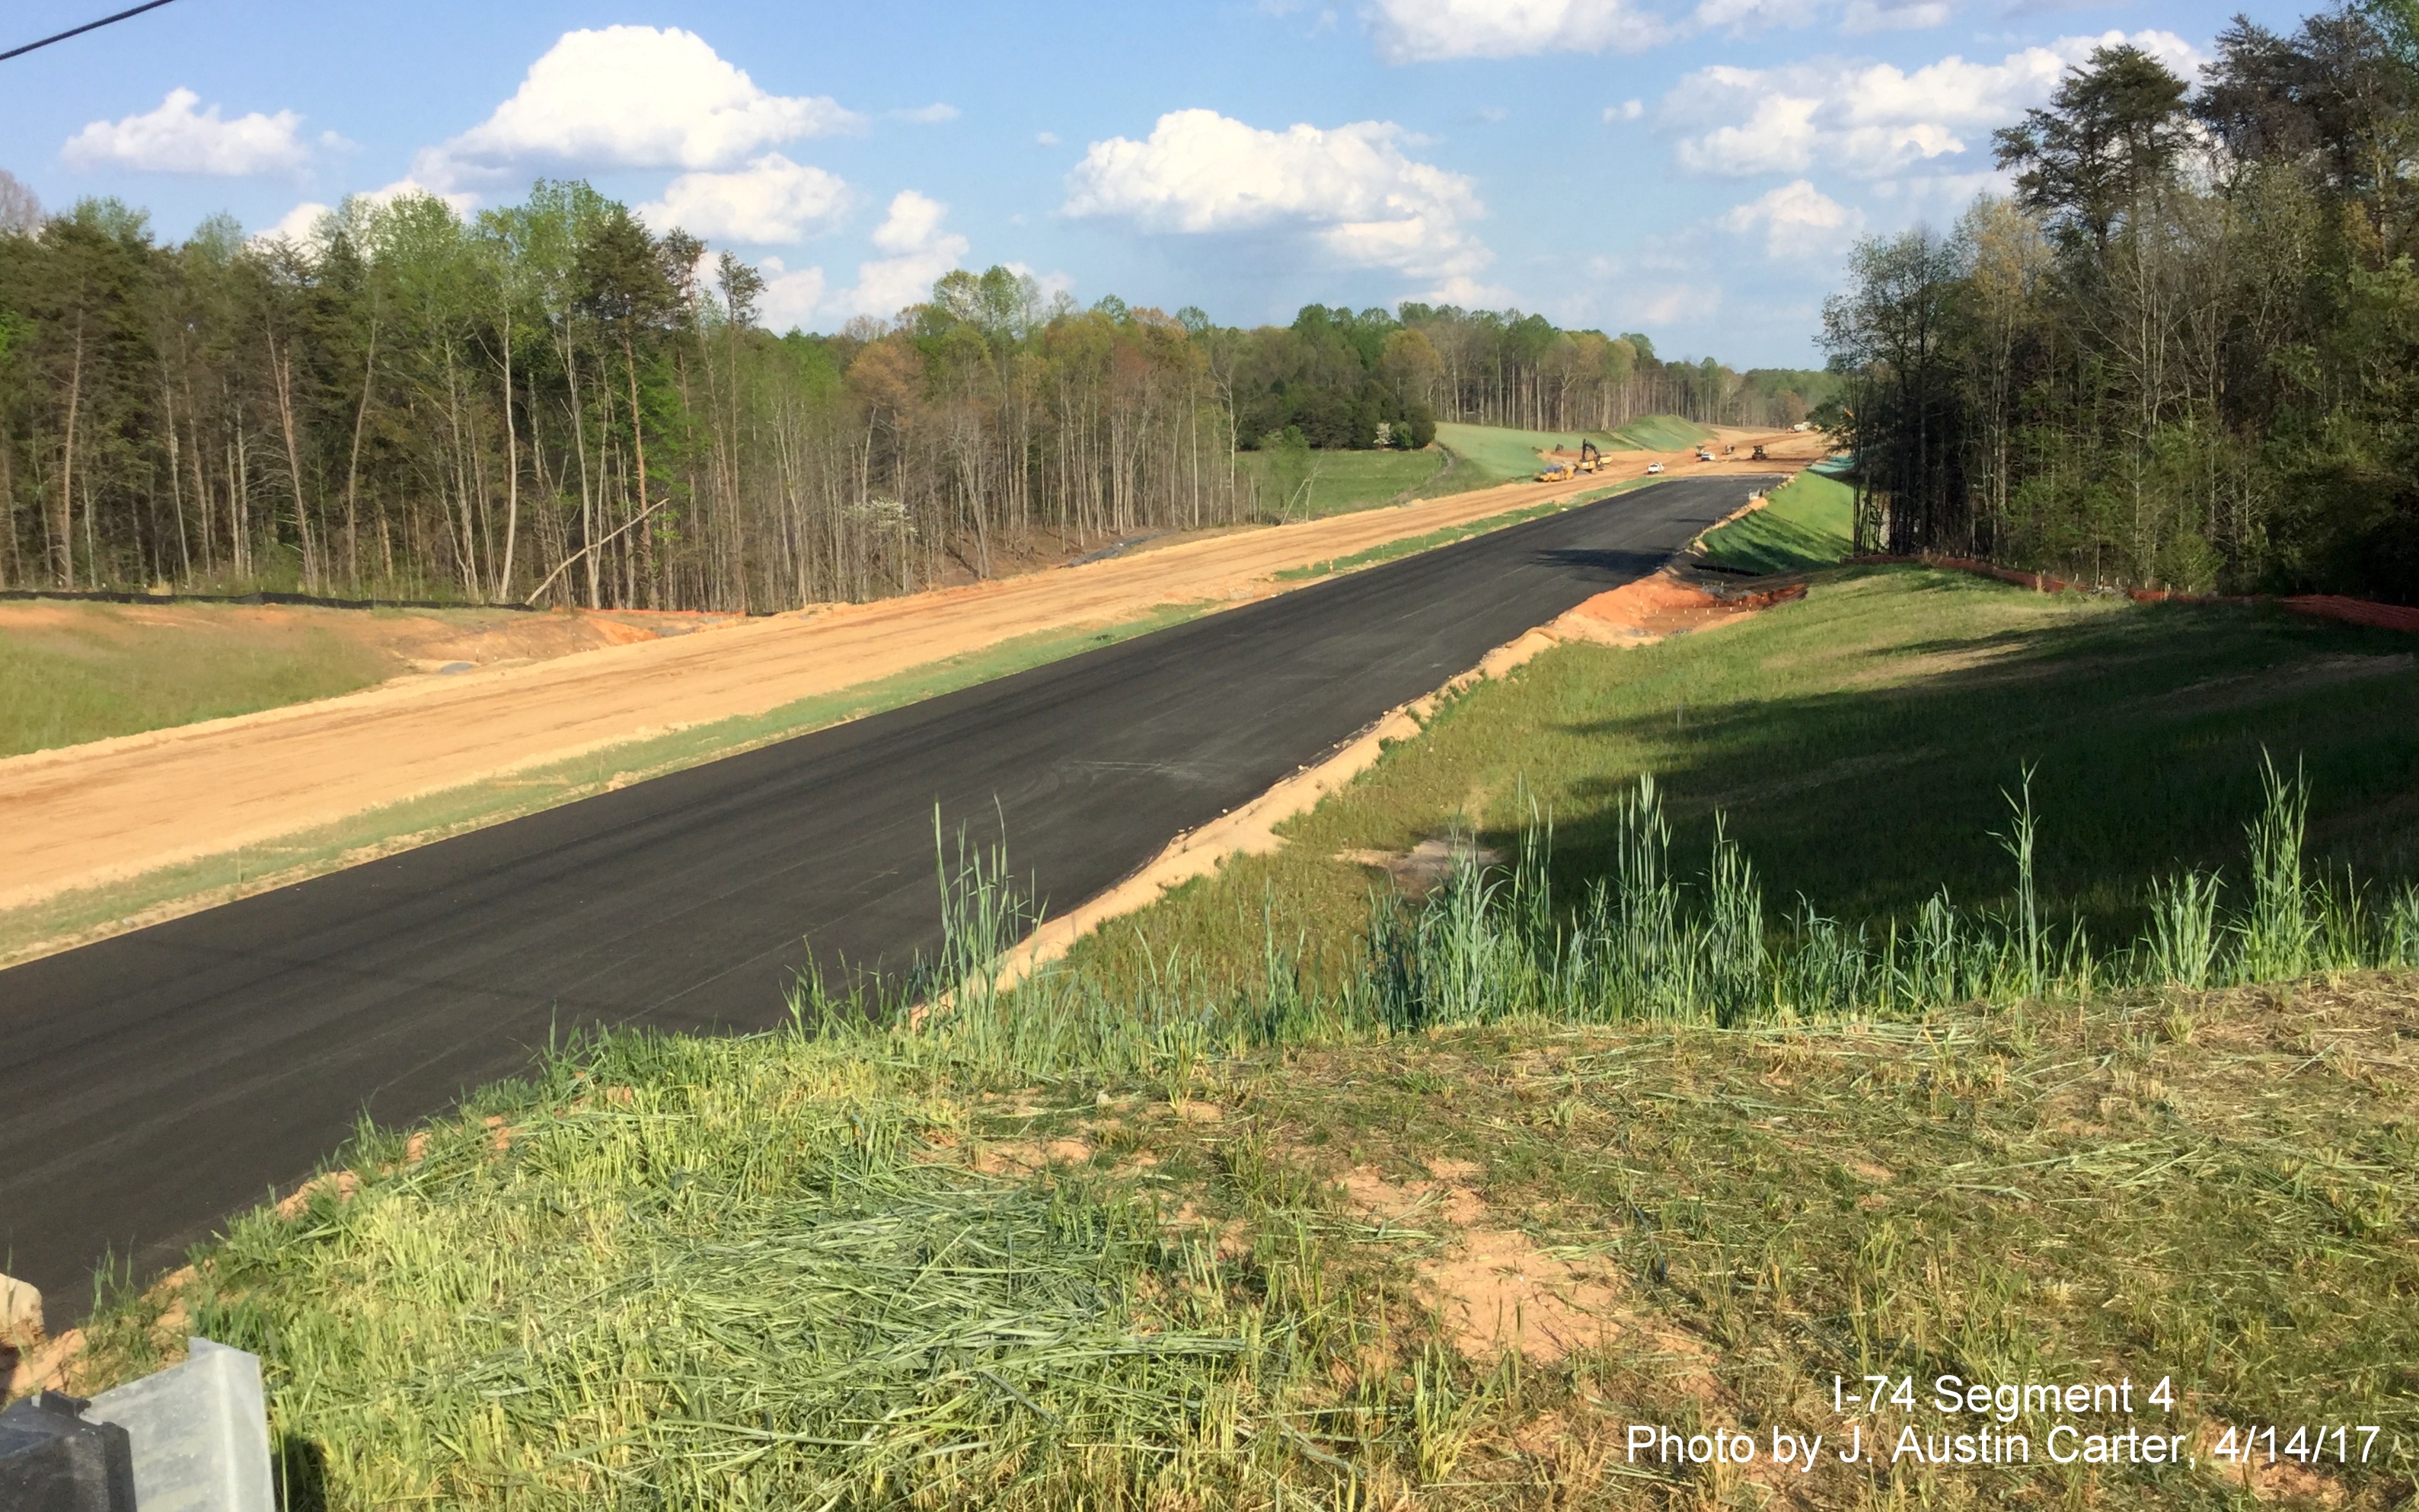 Image of view from completed Walkertown Guthrie Rd bridge over paved lanes for the Future
        I-74 Winston-Salem Beltway, by J. Austin Carter